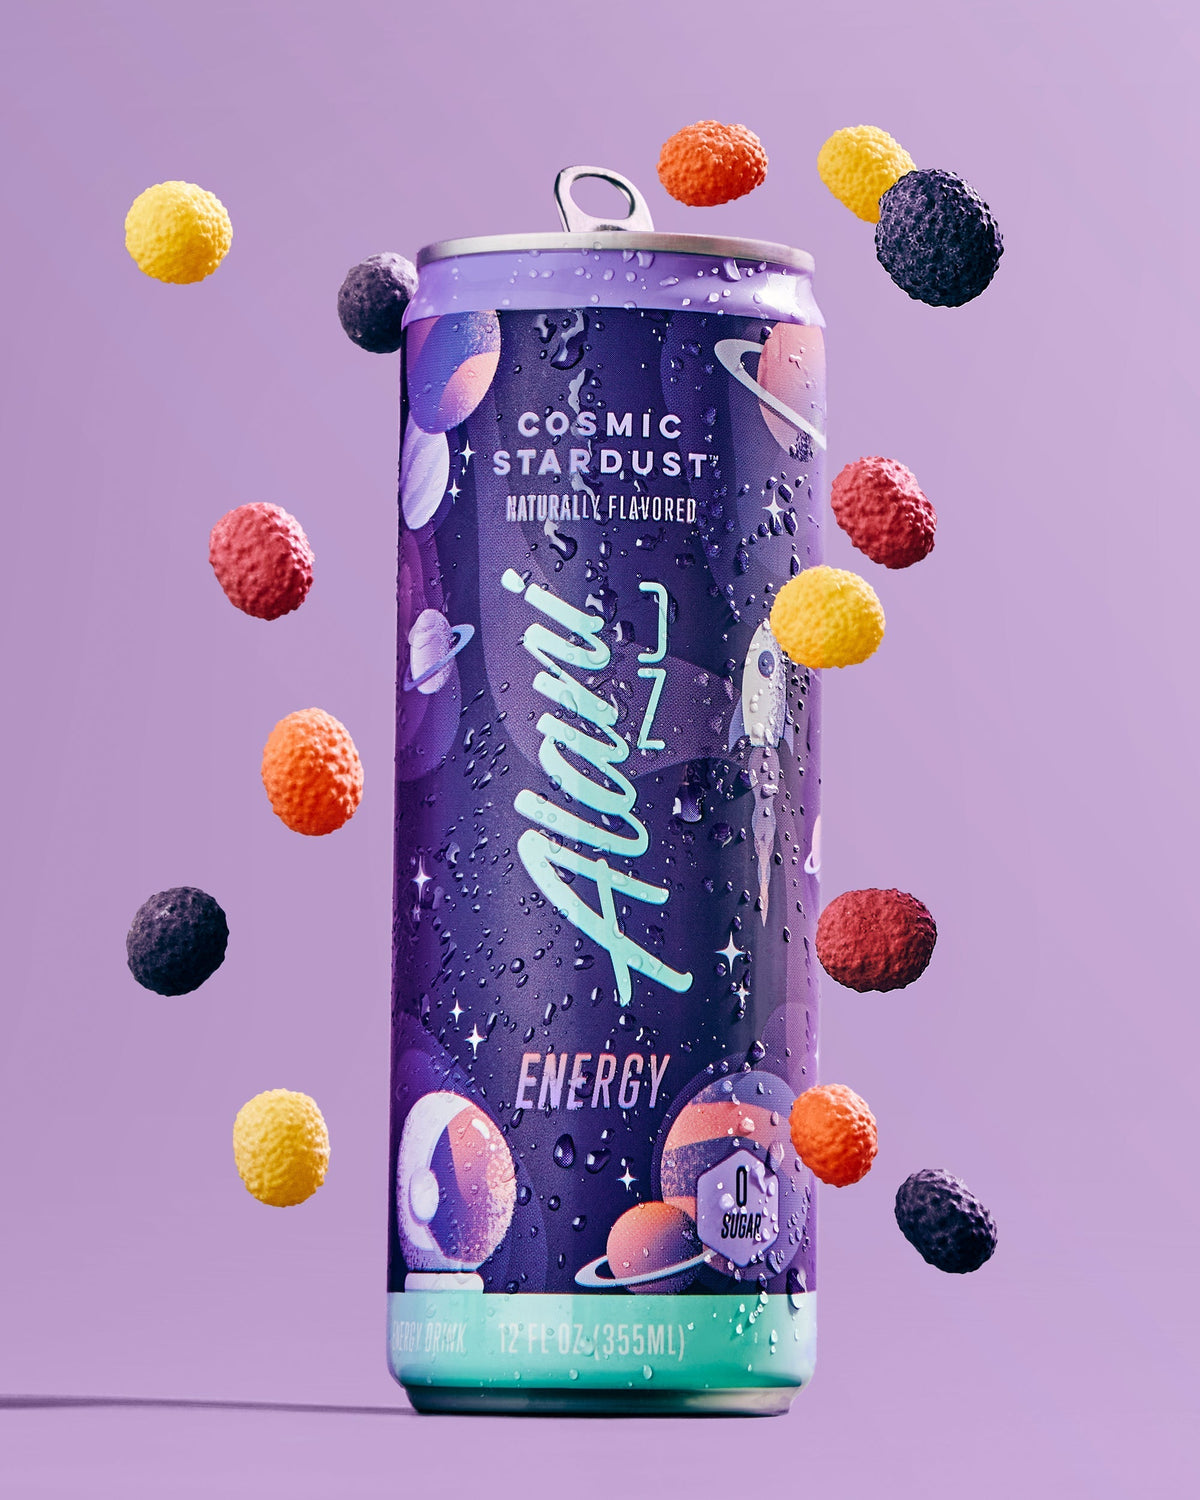 A 12 fl oz can of Cosmic Stardust energy drink by Alani Nu surrounded by candy.